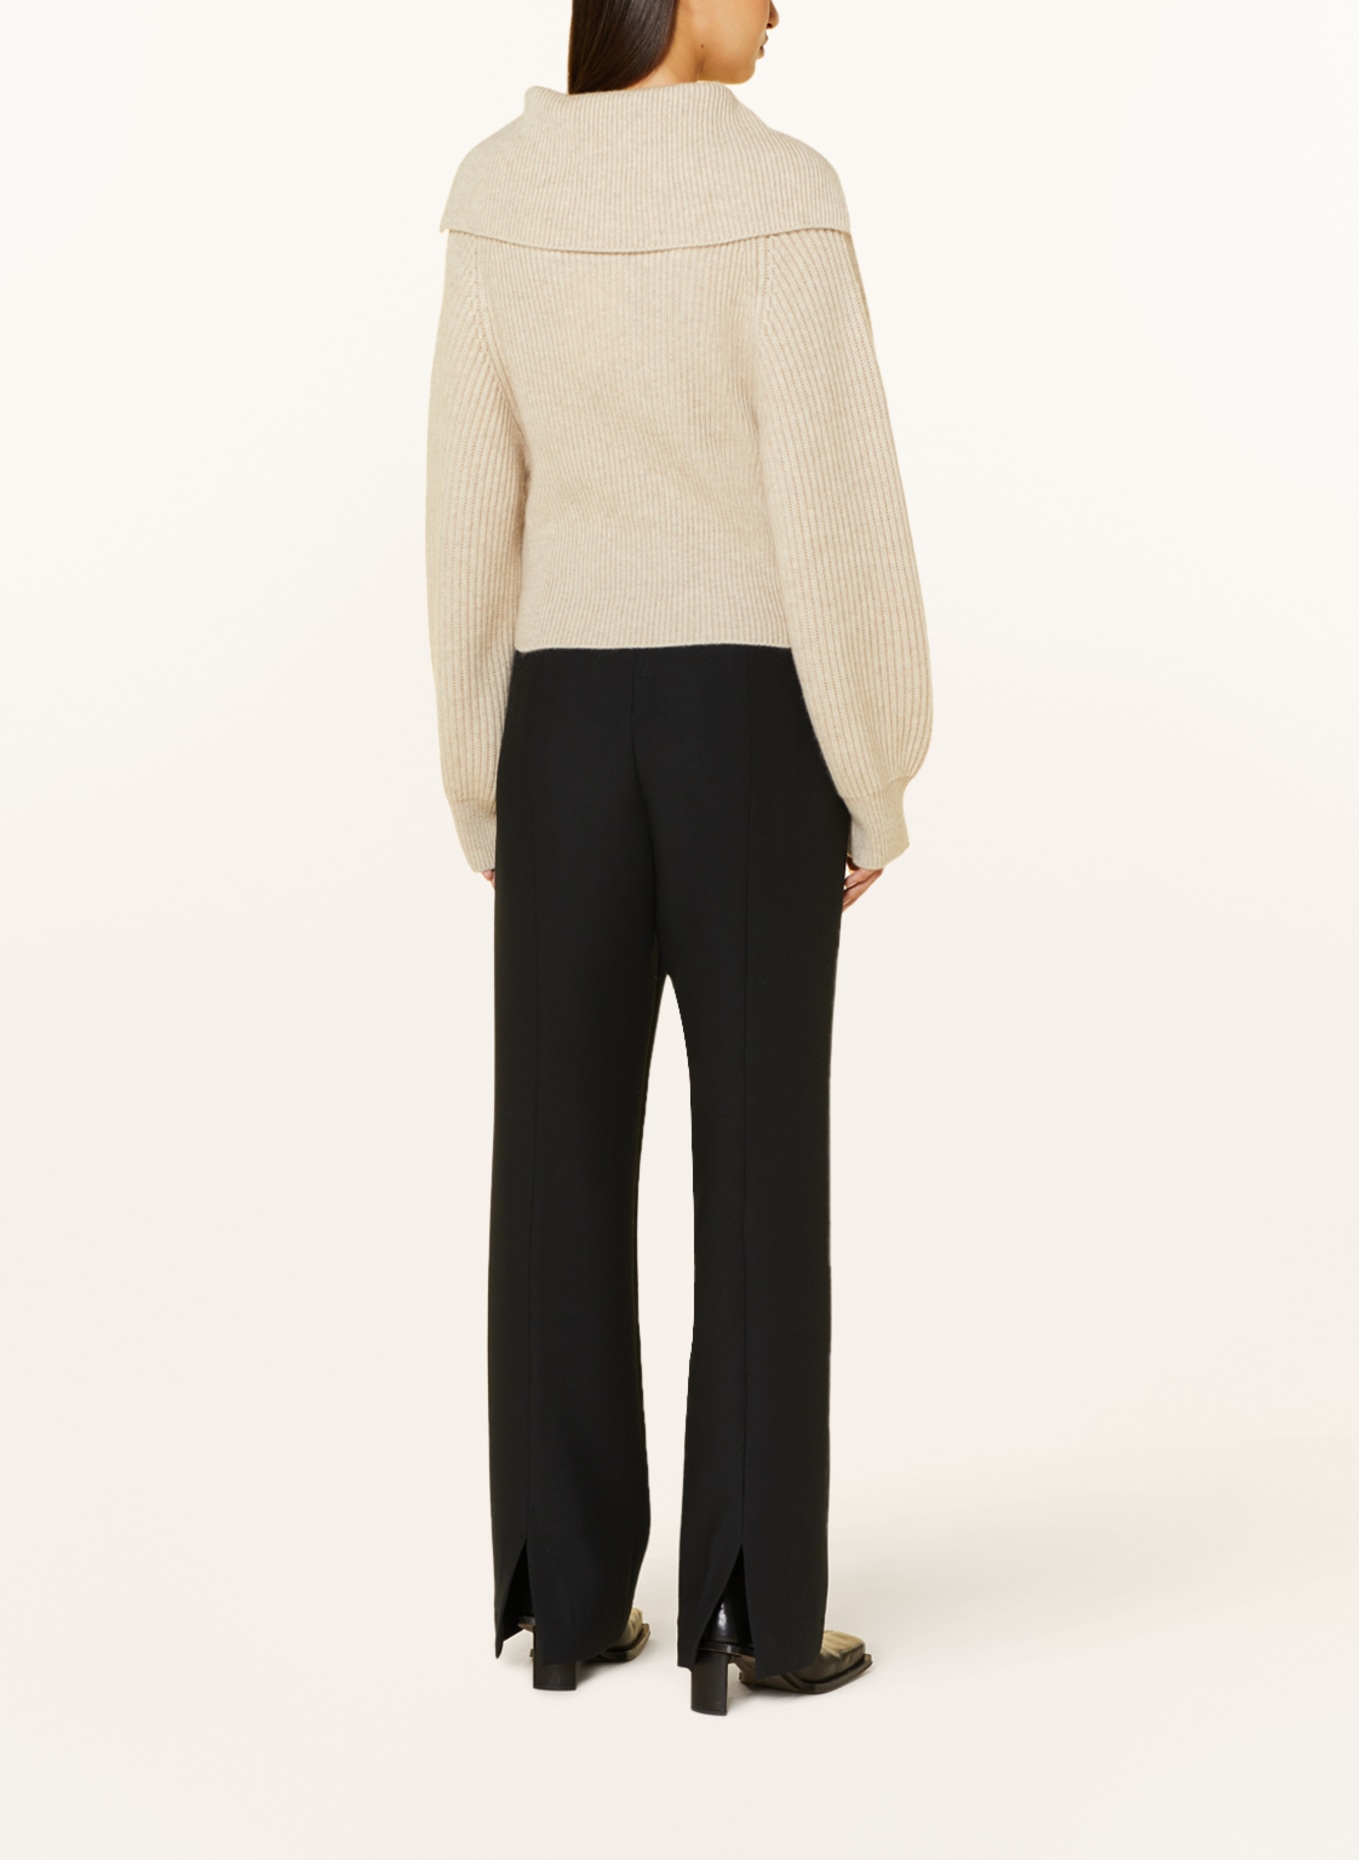 RÓHE Sweater with cashmere, Color: LIGHT BROWN (Image 3)